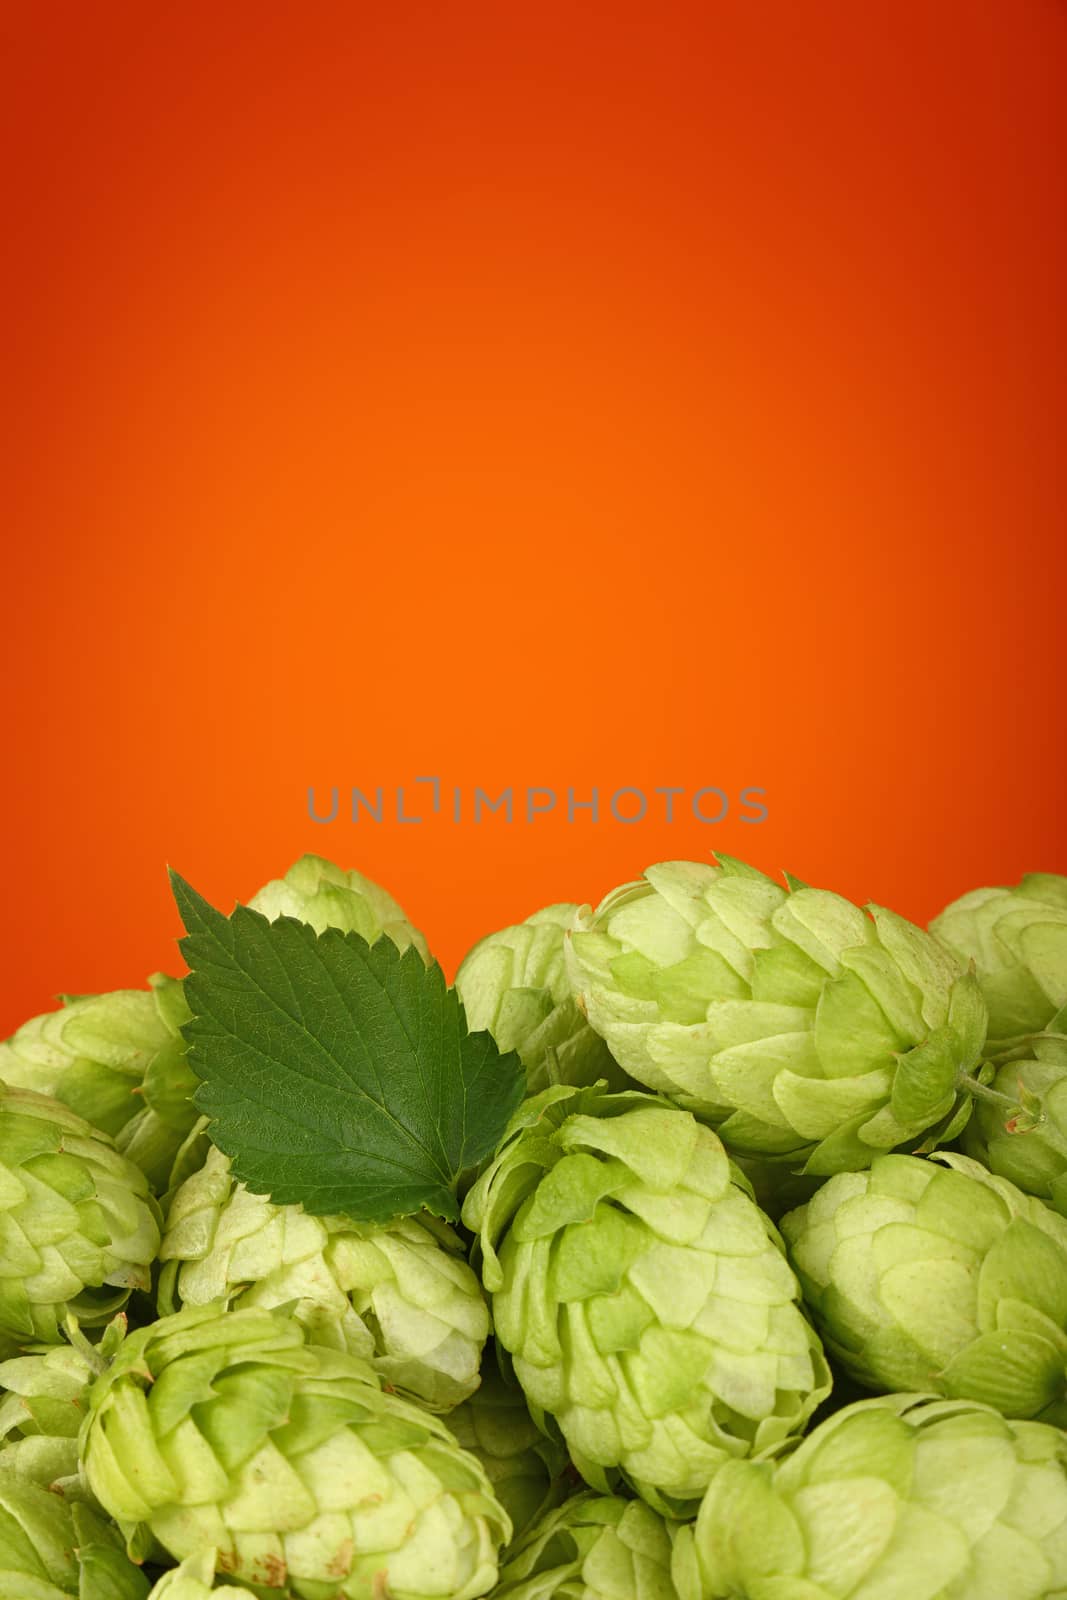 Close up heap of fresh green hops, ingredient for beer or herbal medicine, over warm brown orange background with copy space, low angle side view